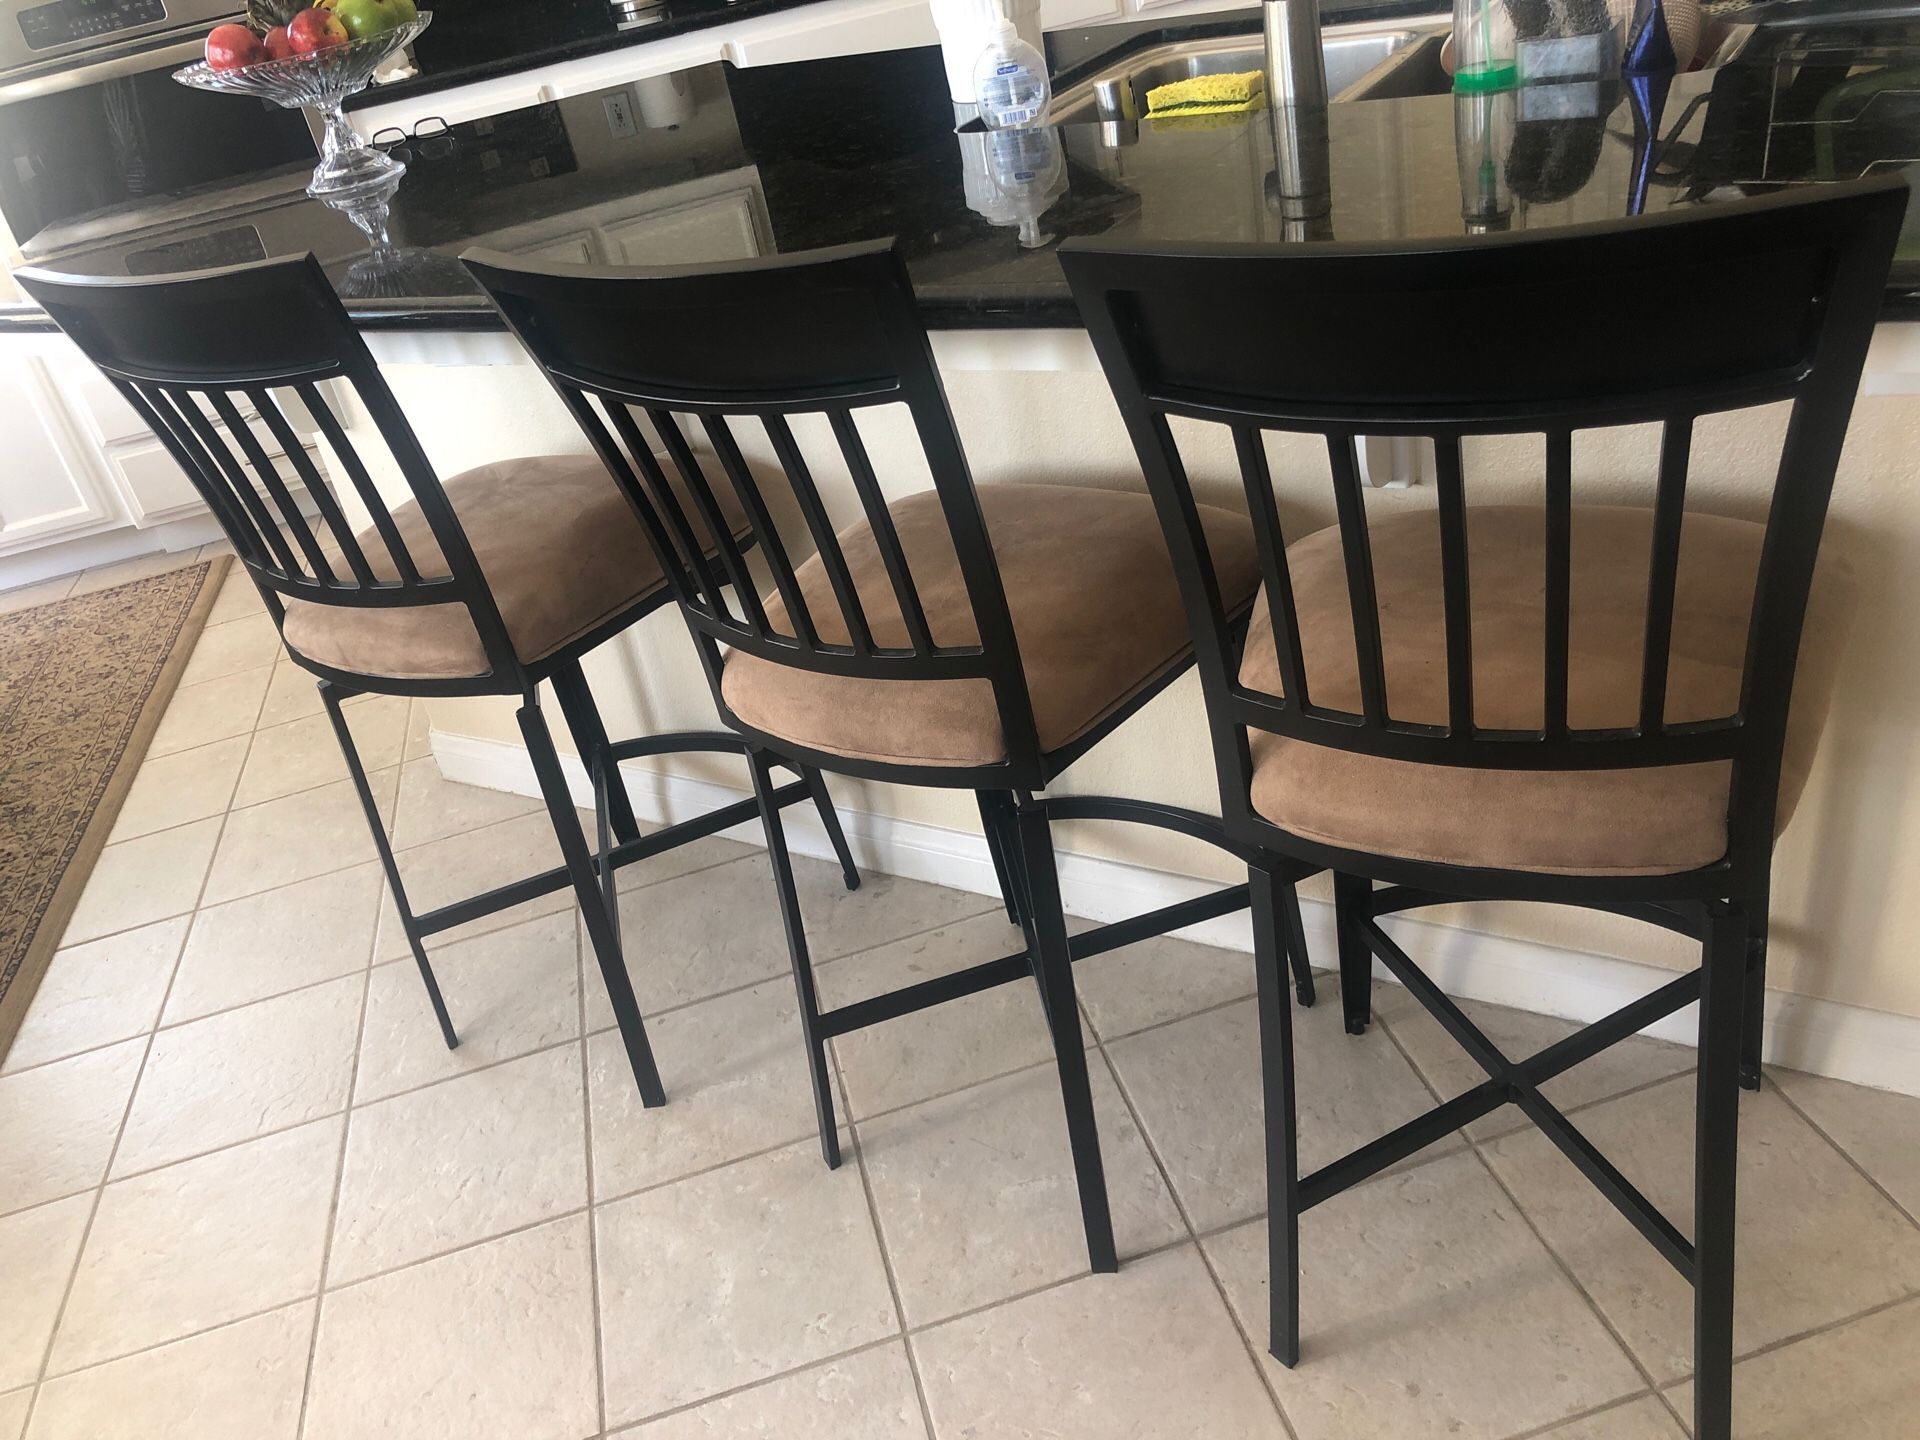 3 Stools for kitchen island table